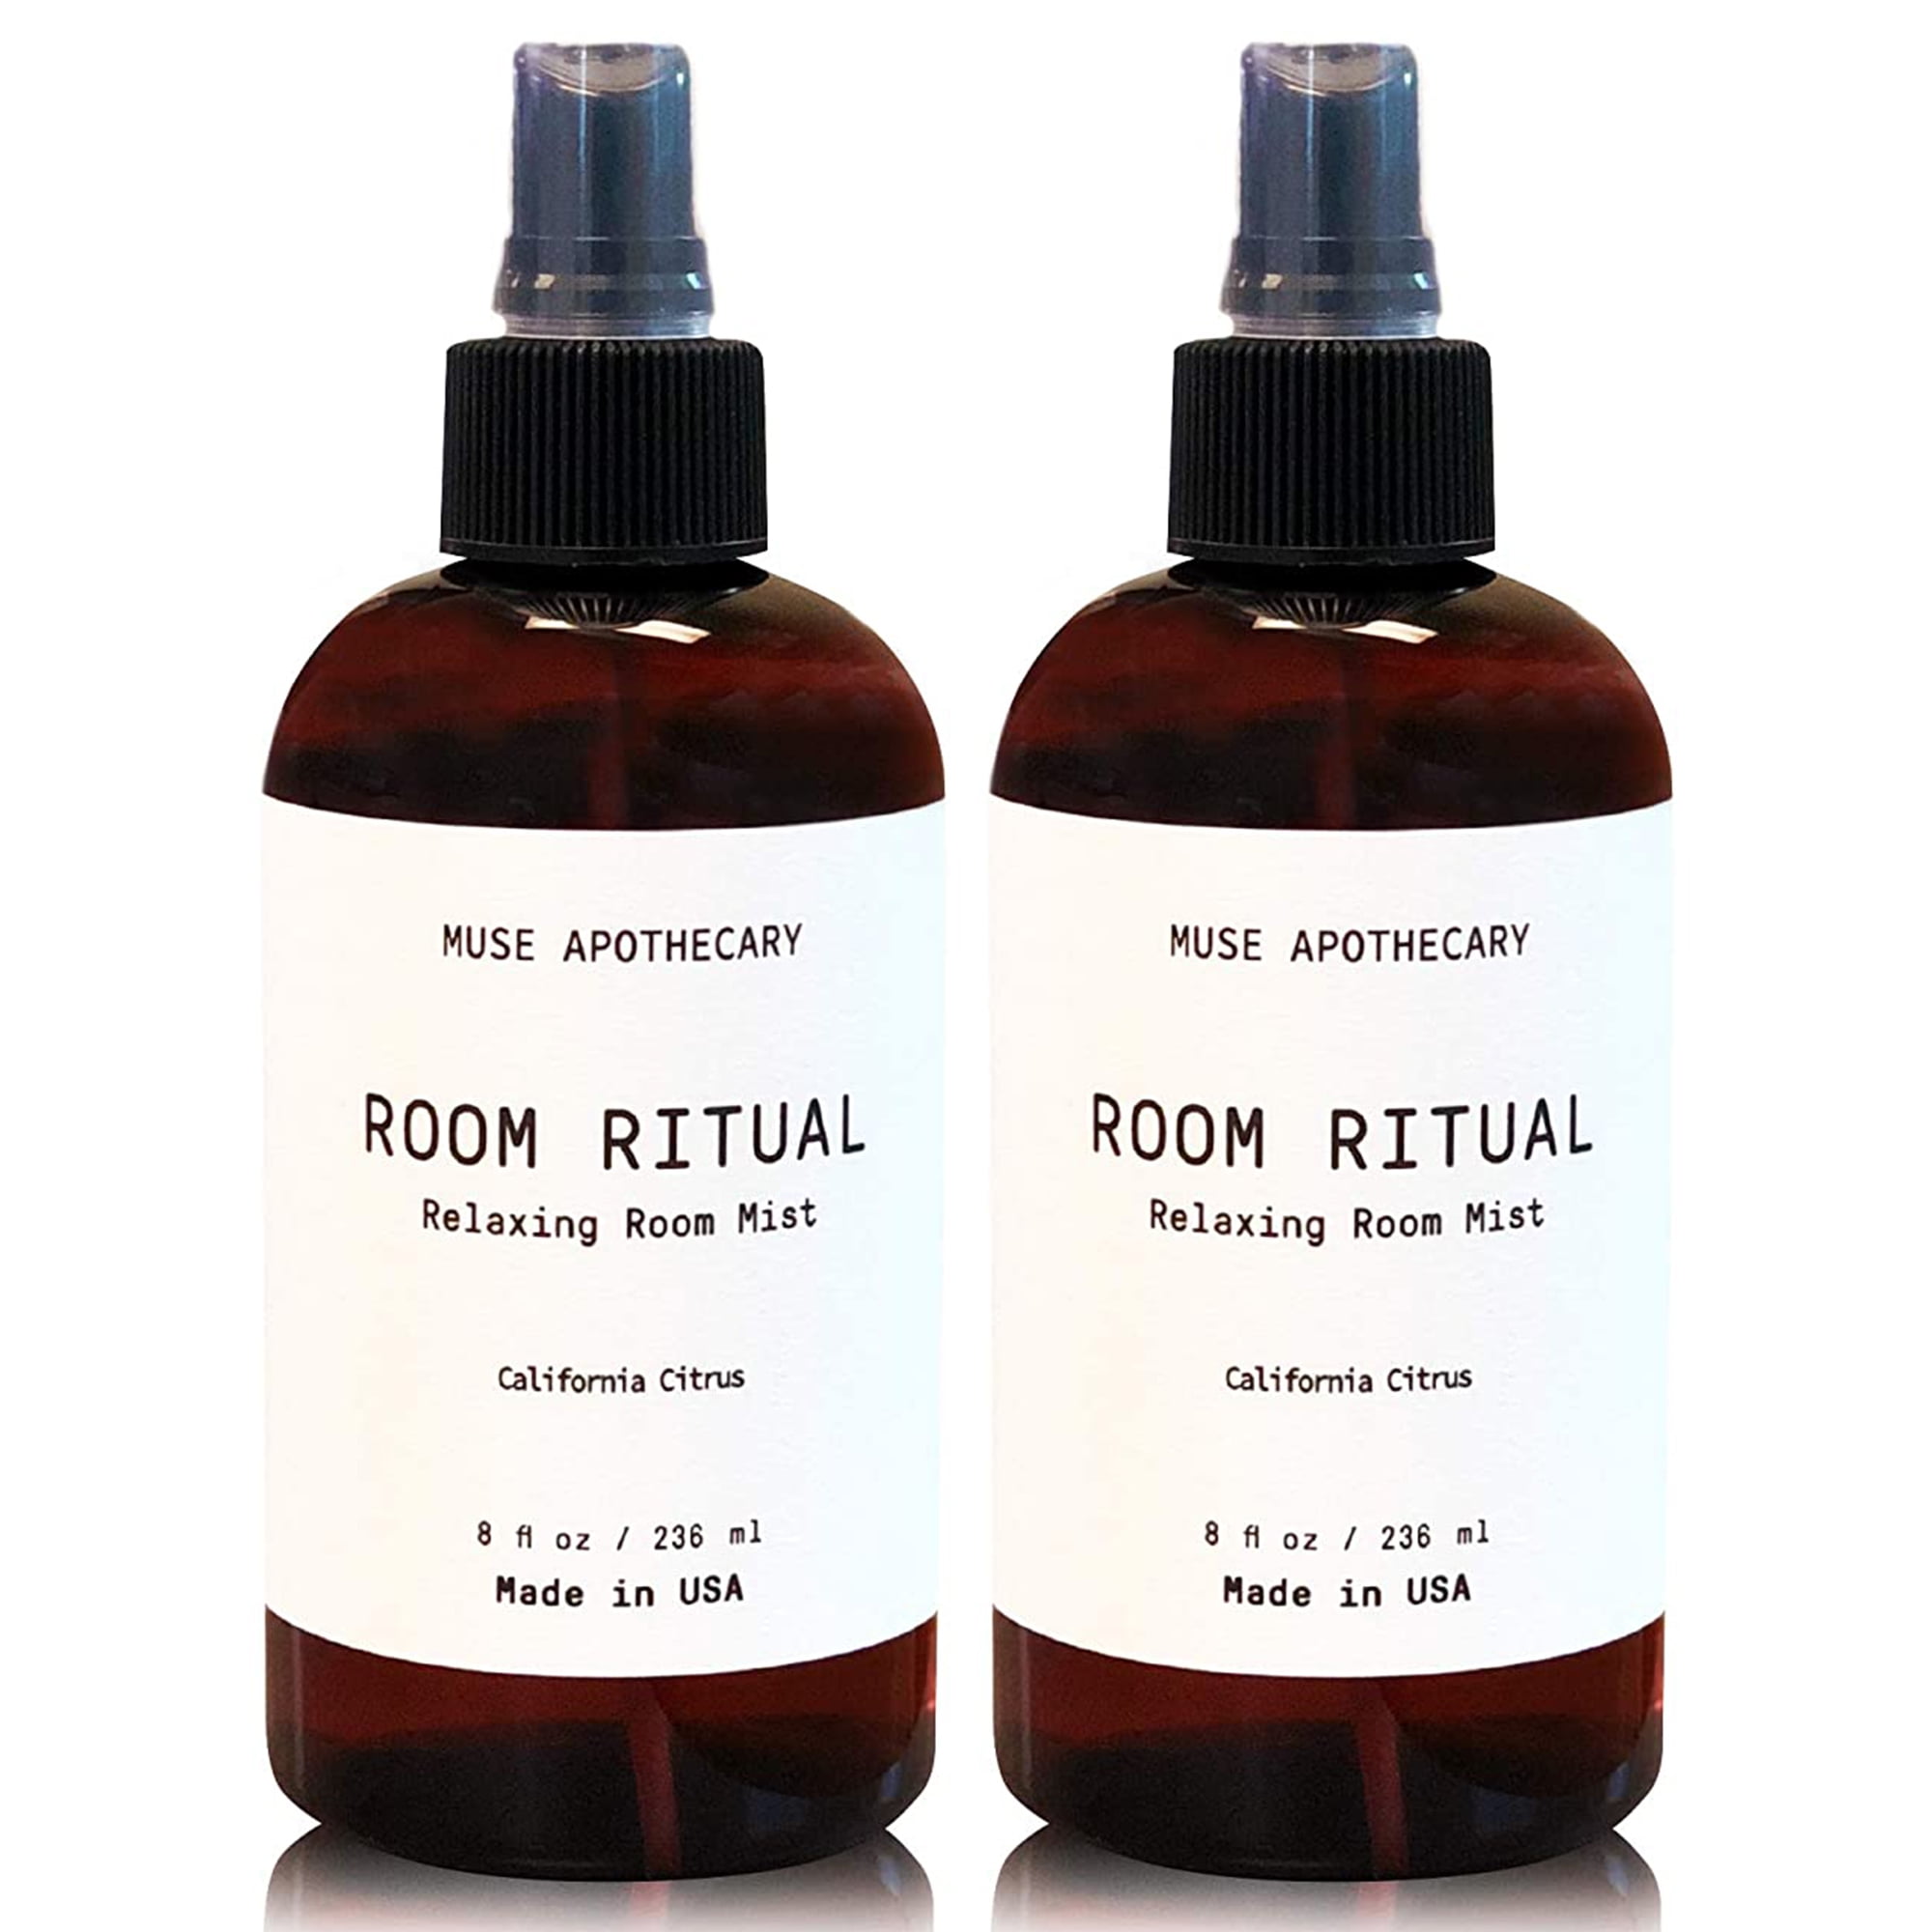 Muse Apothecary Room Ritual Luxury Aromatherapy Room Spray Air Freshener  with Essential Oils, California Citrus 8-Oz 2-Pack 